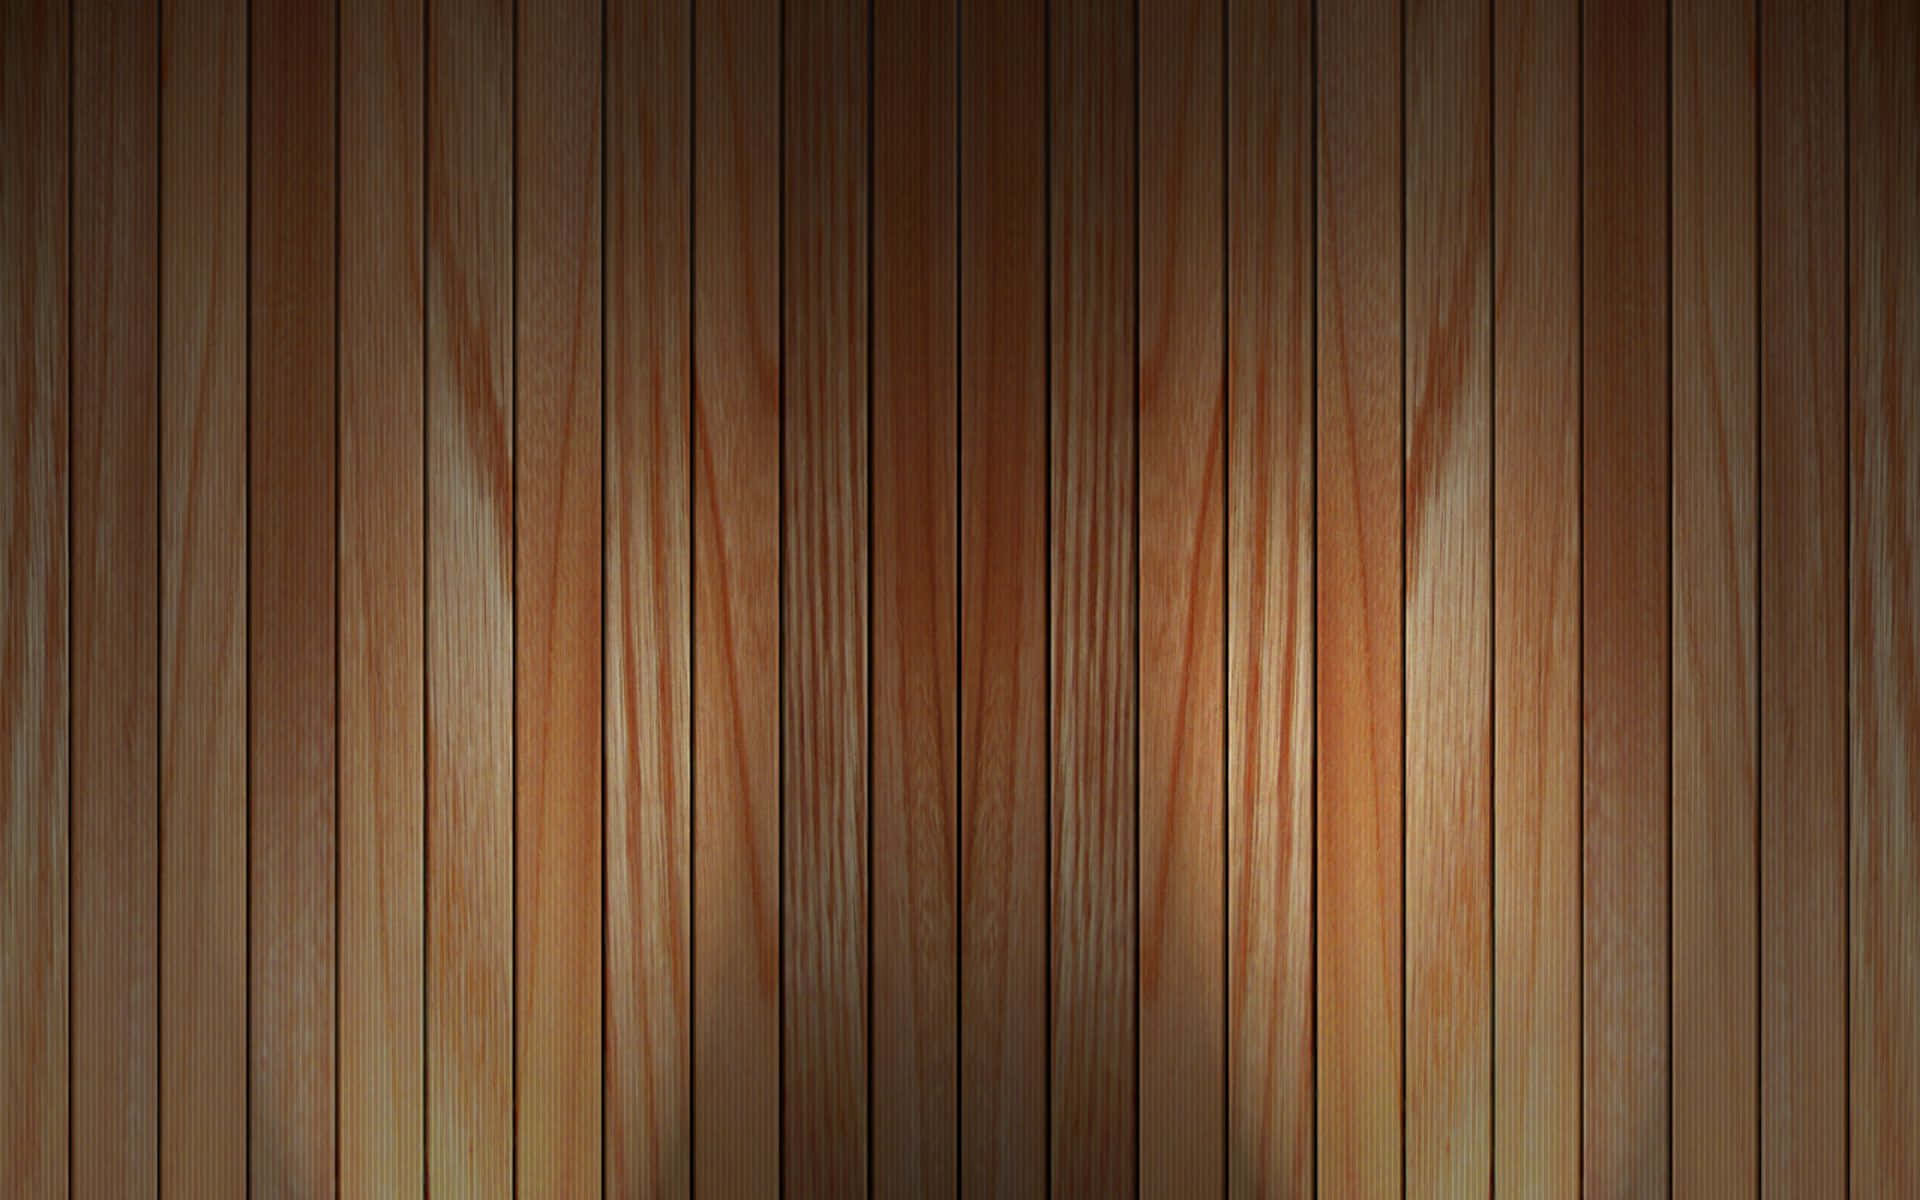 Wood Planks With Spaces Background